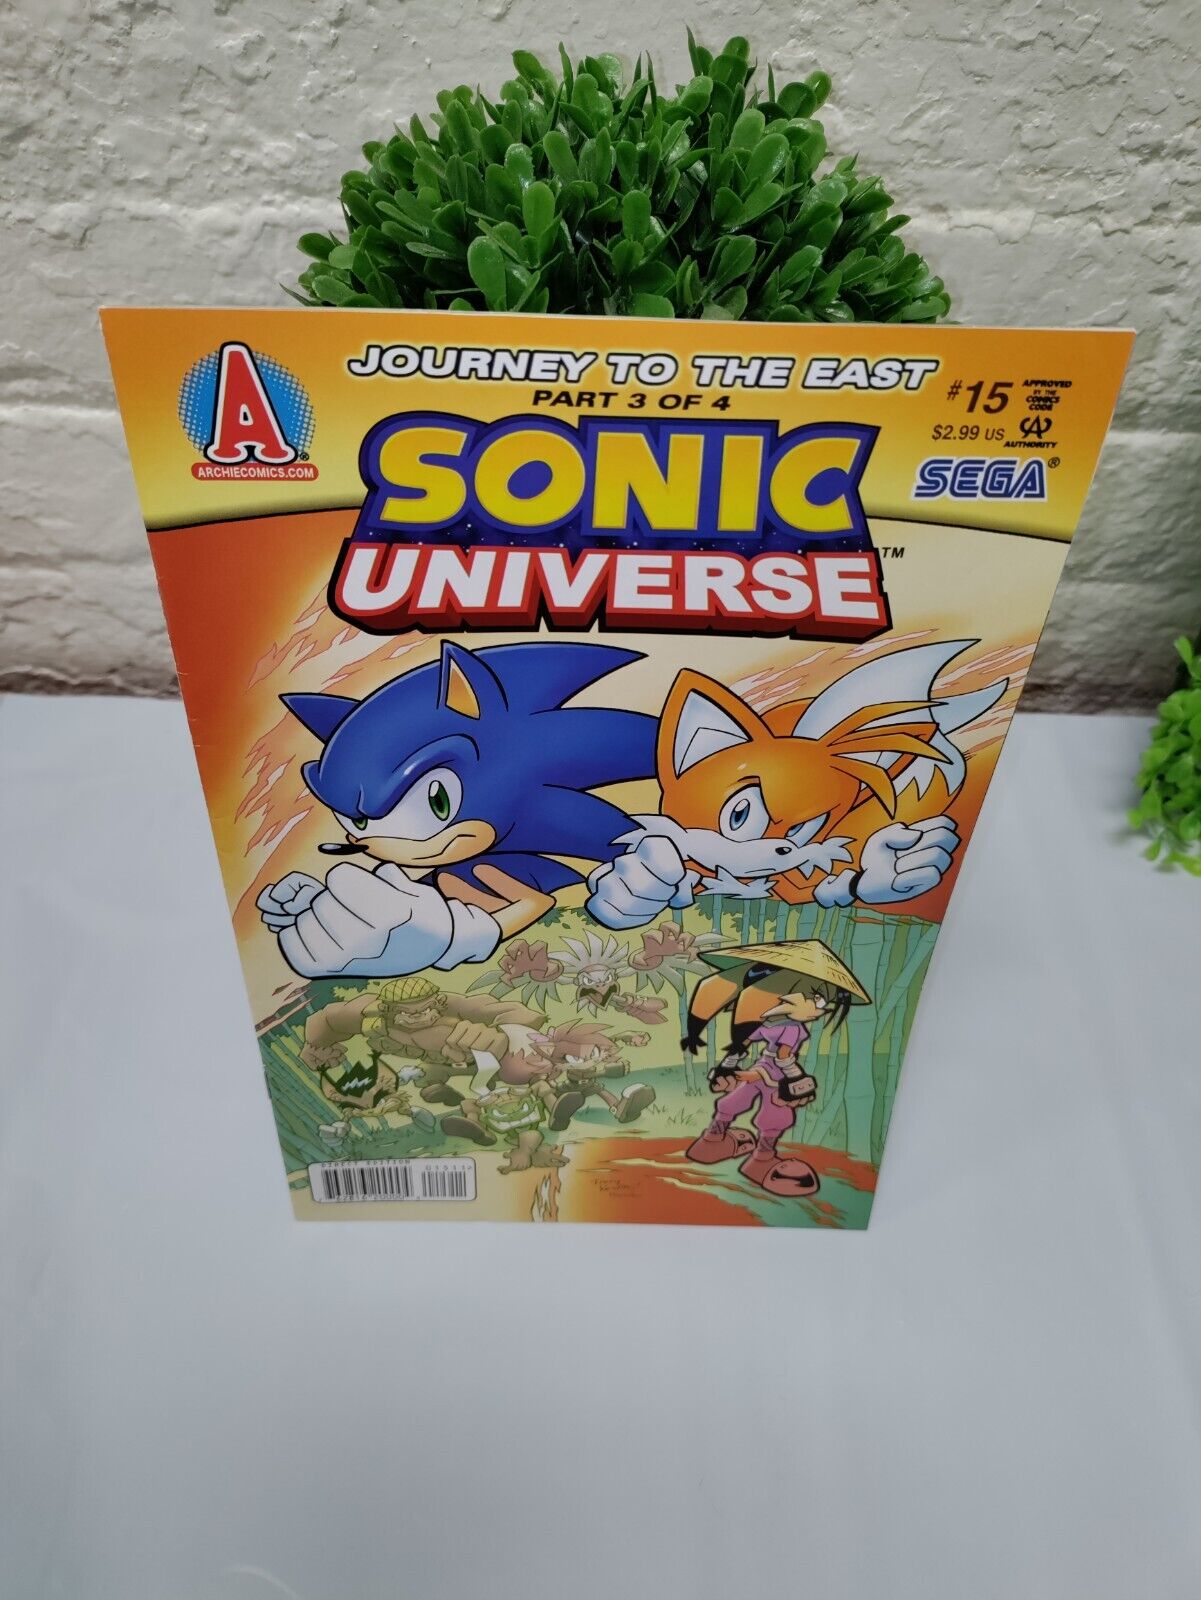 Sonic Universe #15, (2010, Archie Comics): Journey to the East #3